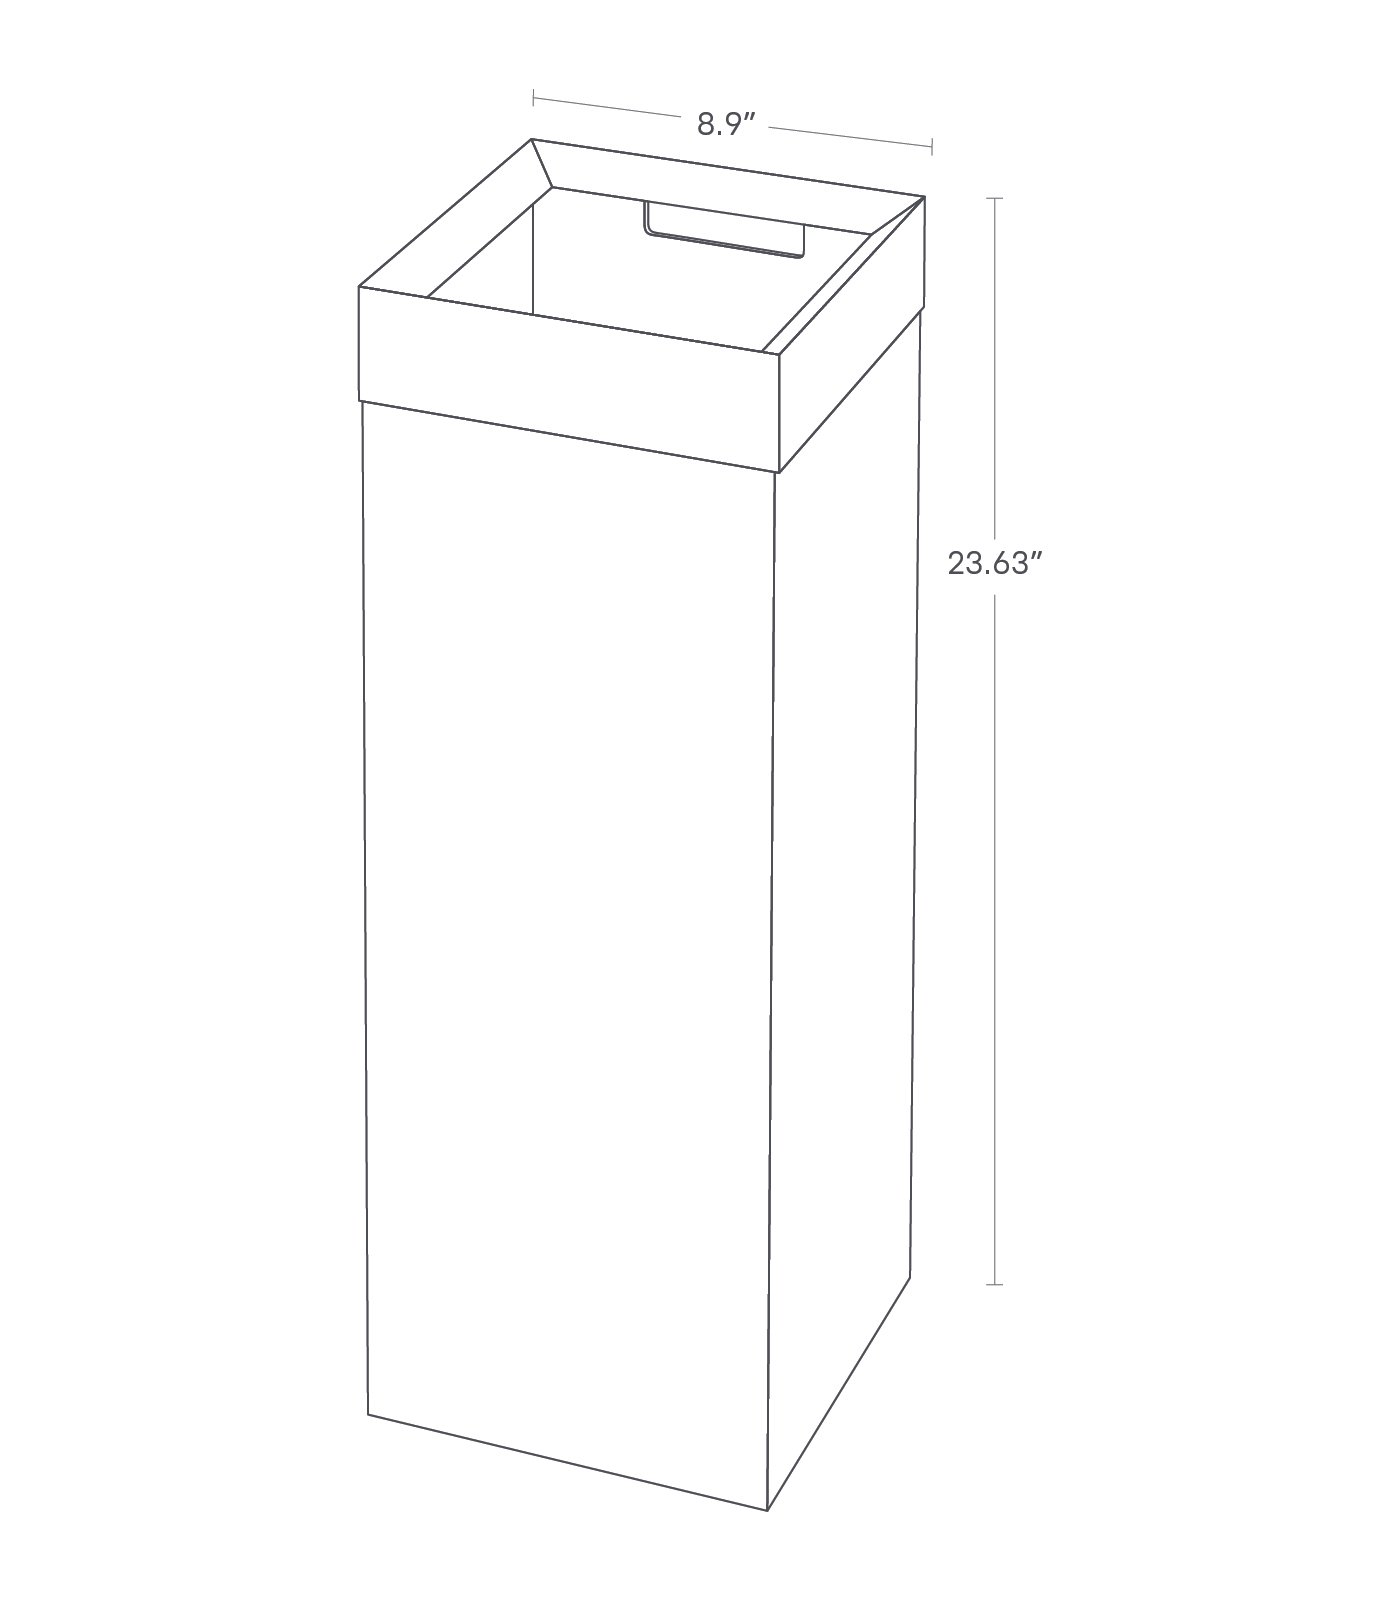 Dimension image for Trash Can on a white background including dimensions  L 8.86 x W 8.86 x H 23.62 inches